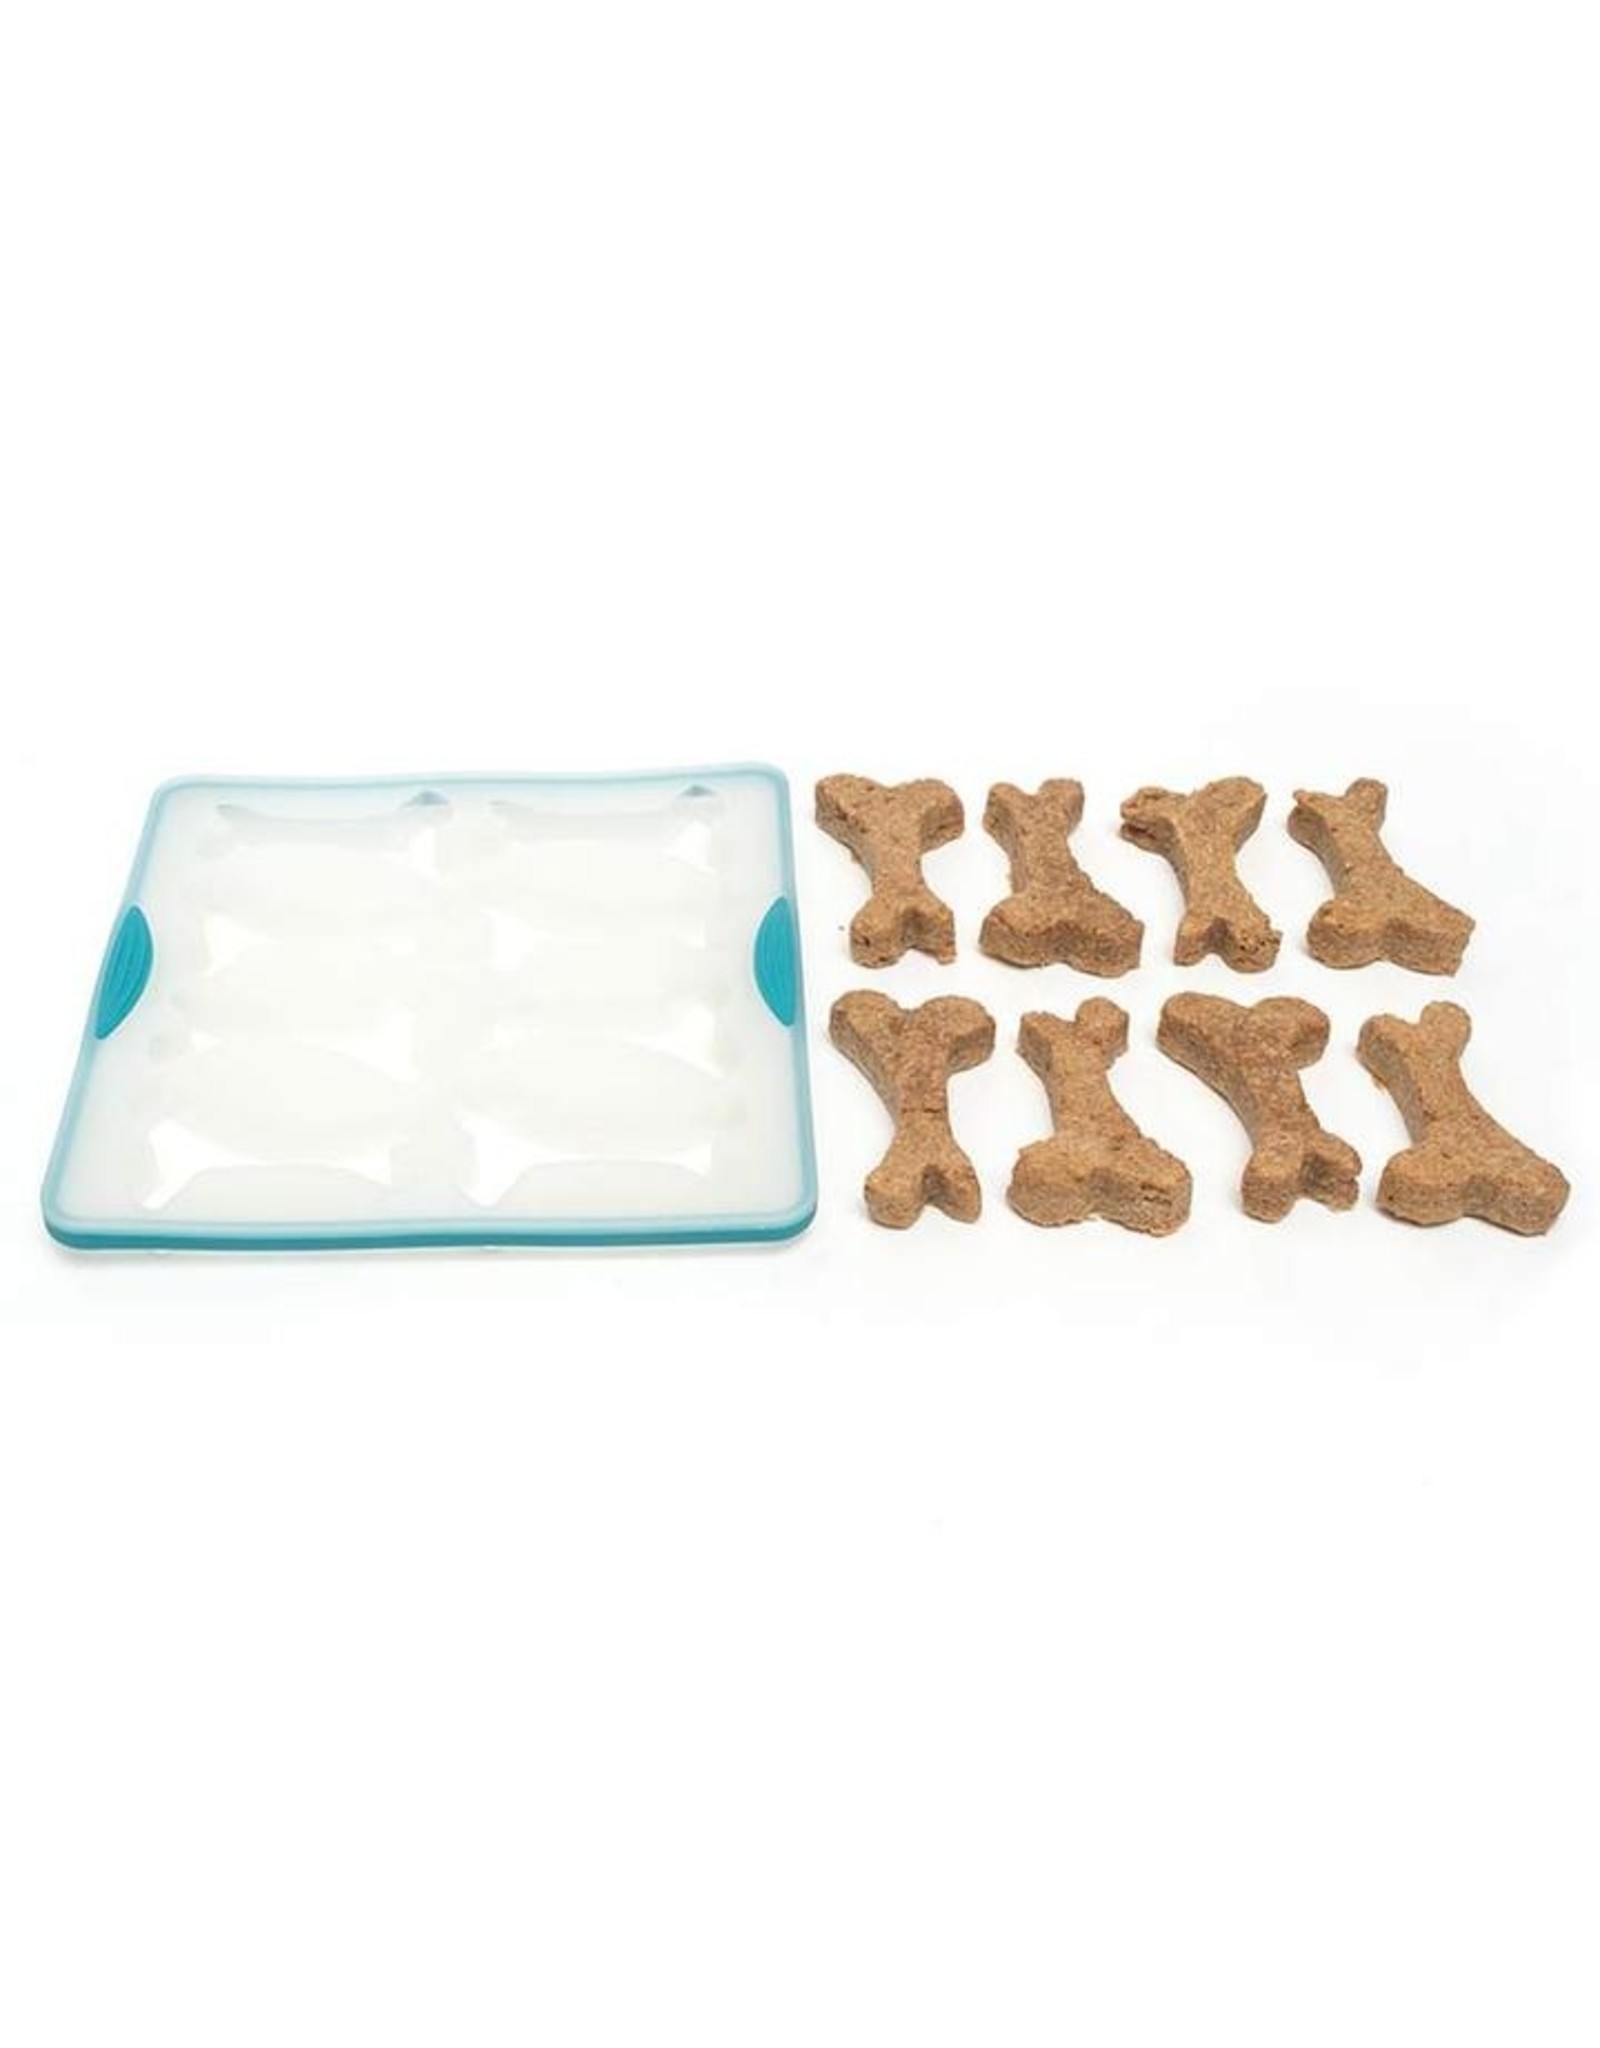 Messy Mutts MESSY MUTTS SILICONE SMALL DOG TREAT MAKER